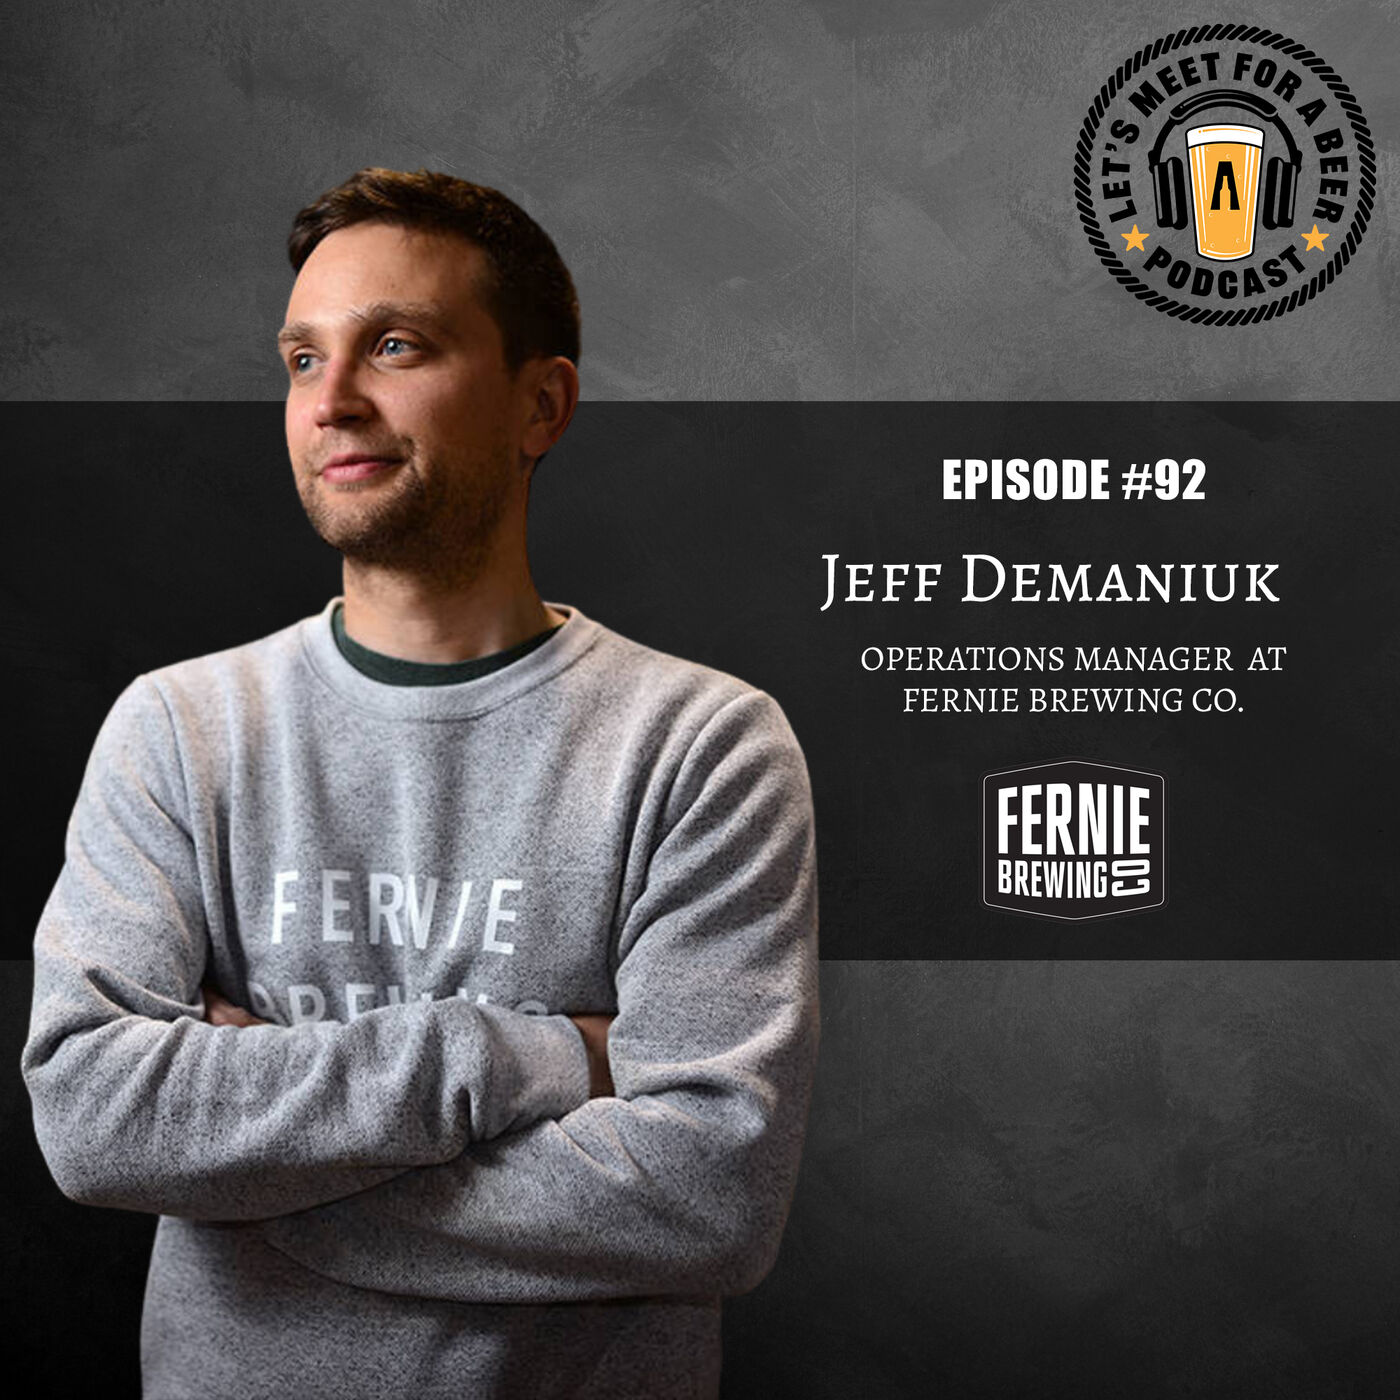 Episode #92 – Jeff Demaniuk, Operations Manager at Fernie Brewing Co.